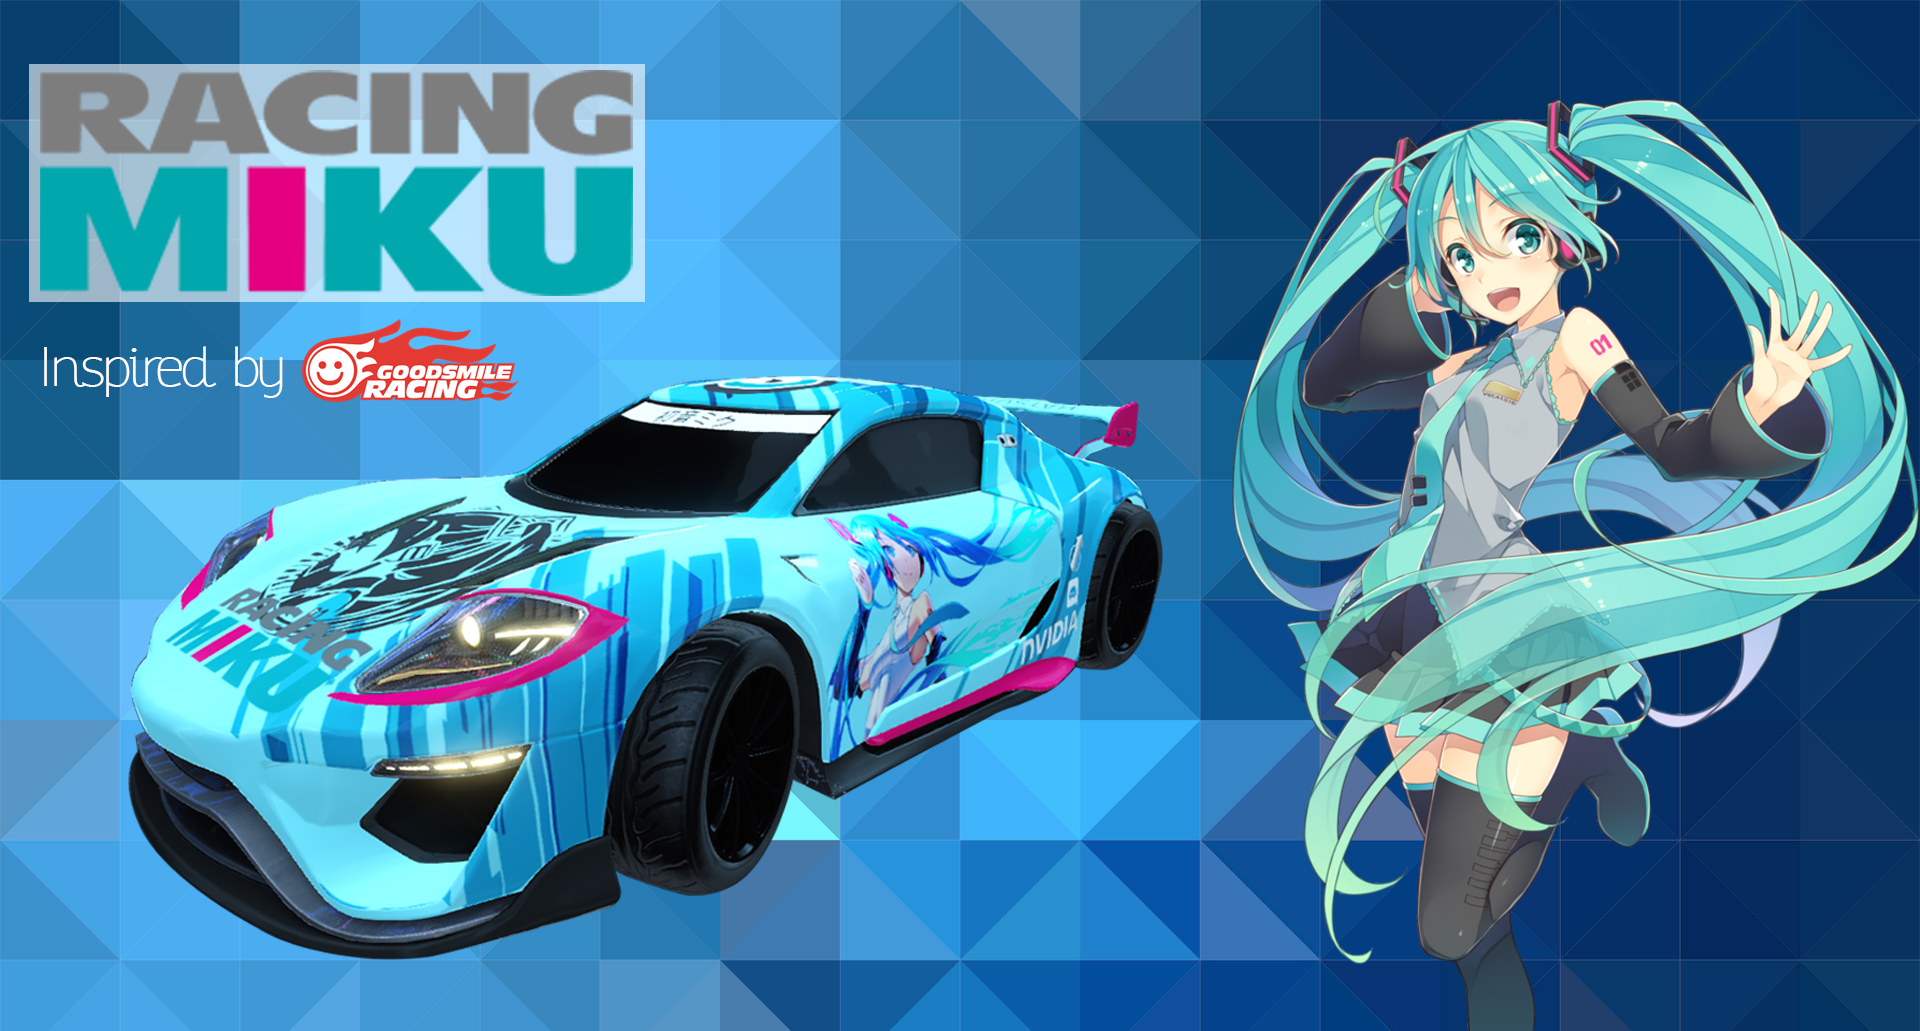 Racing Miku Jager Livery (Inspired By Goodsmile Racing)